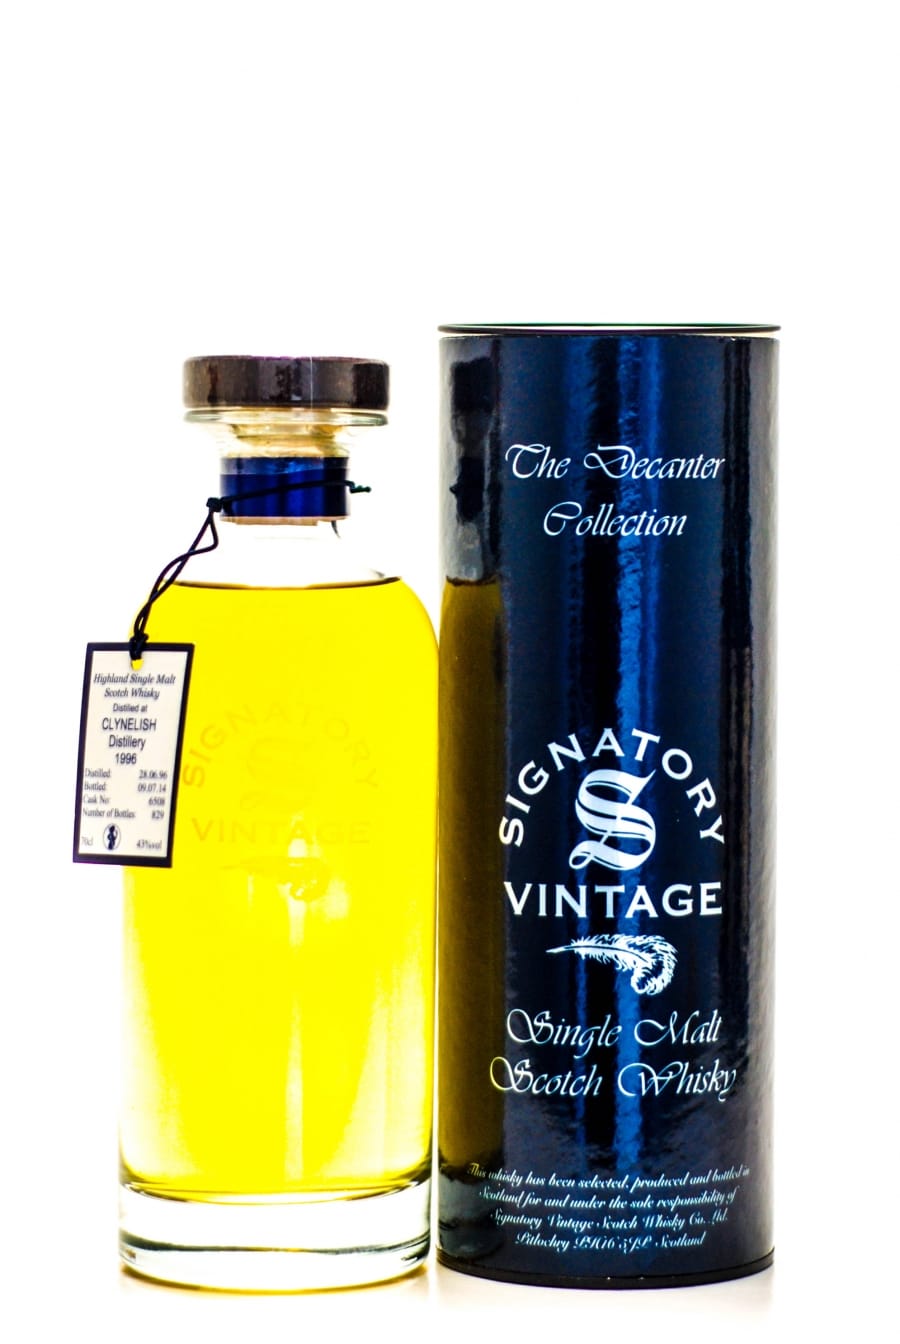 Clynelish - 18 Years Old Signatory Vintage Decanter Collection Cask:6508 43% 1996 In Original Container